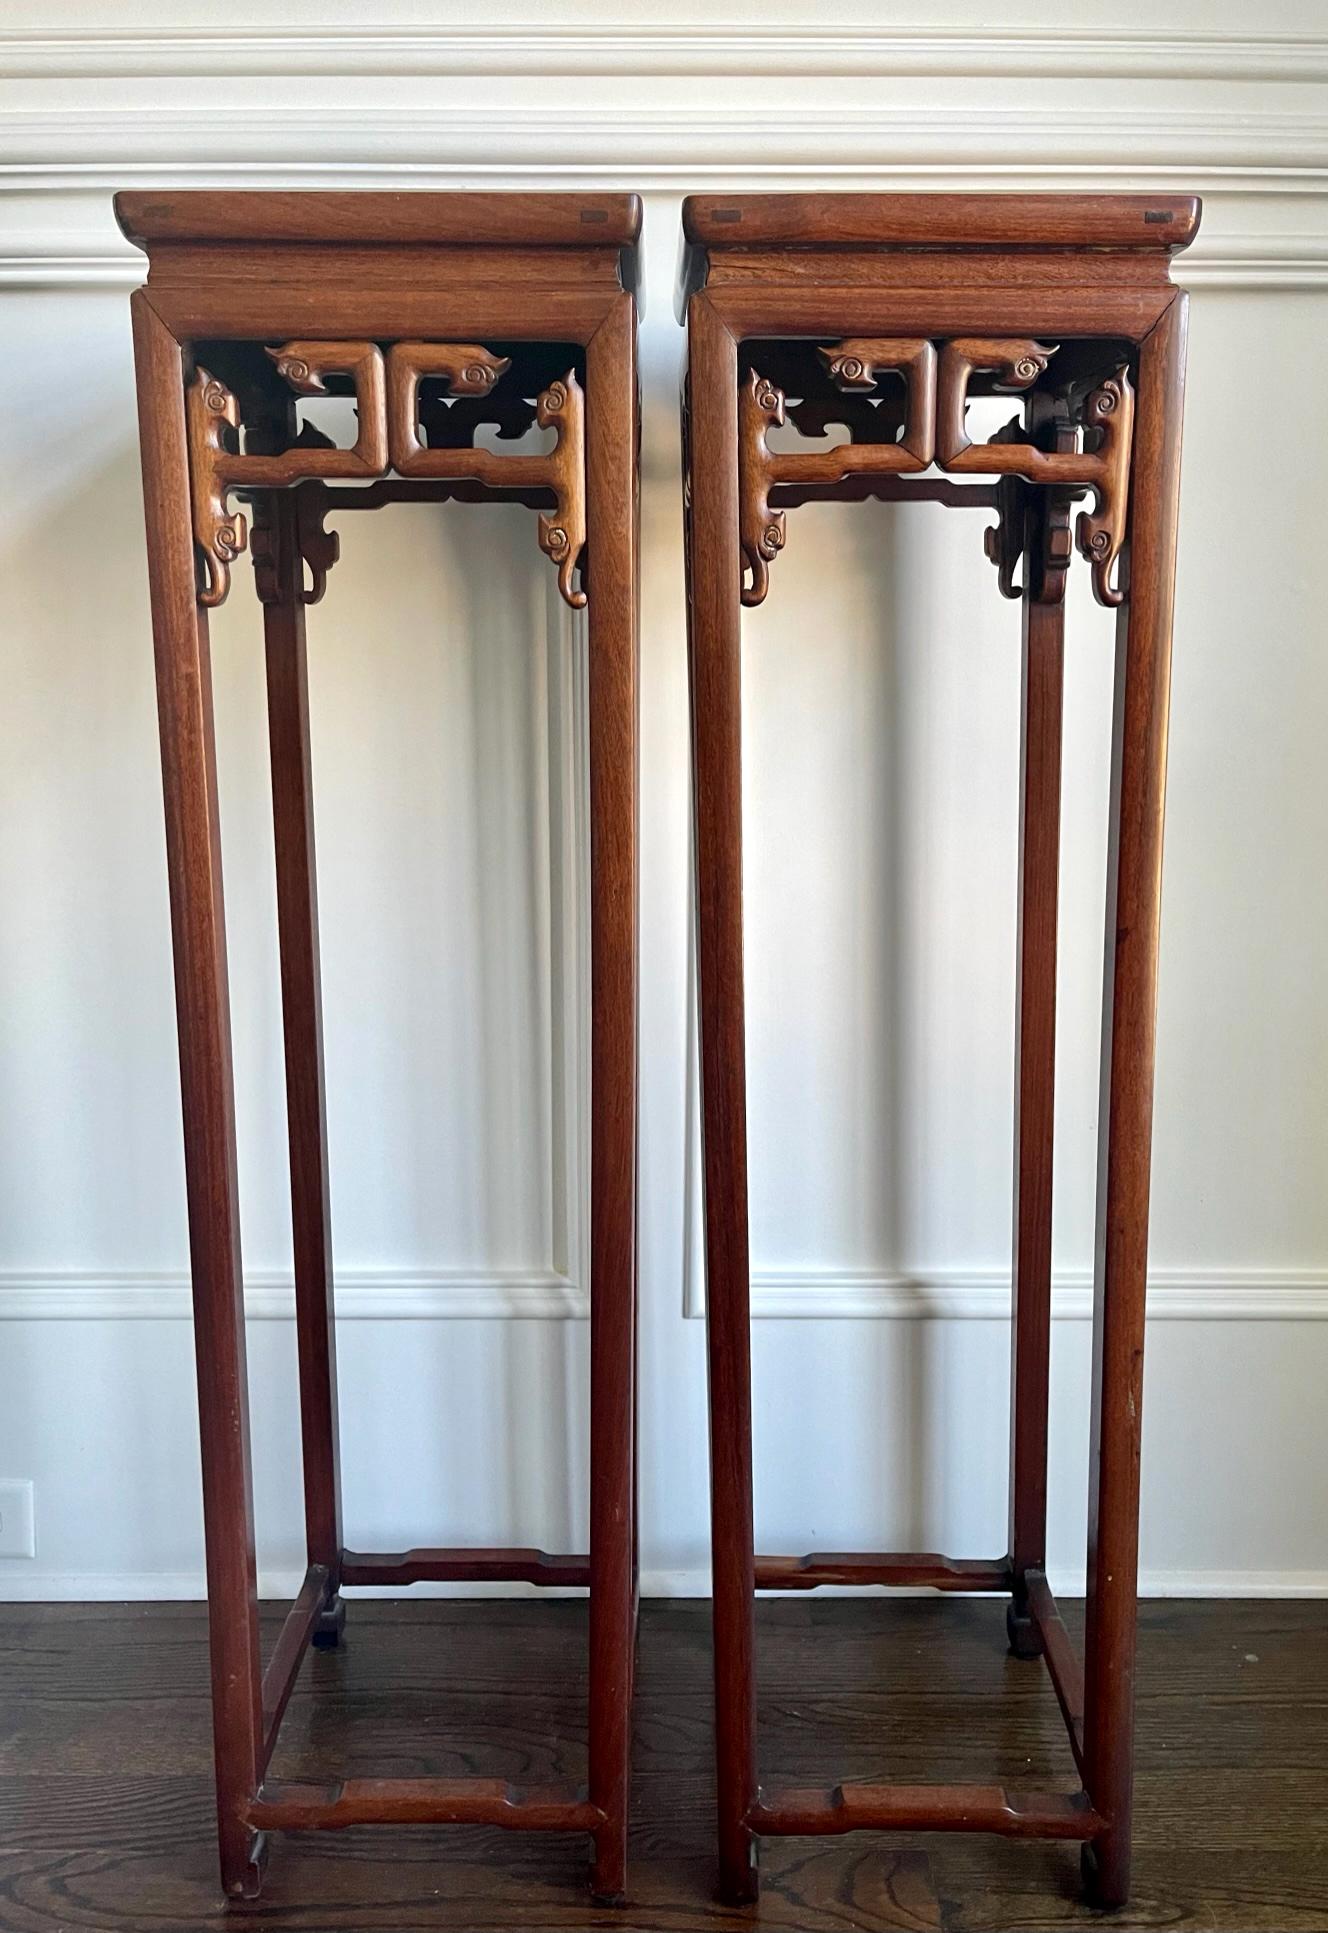 A pair of tall Chinese pedestal stands circa 19th century the late Qing dynasty. These types of stands were traditionally used to display vases or planters in the hall of the residence of wealthy Chinese. The pair of stands was made from hardwood of